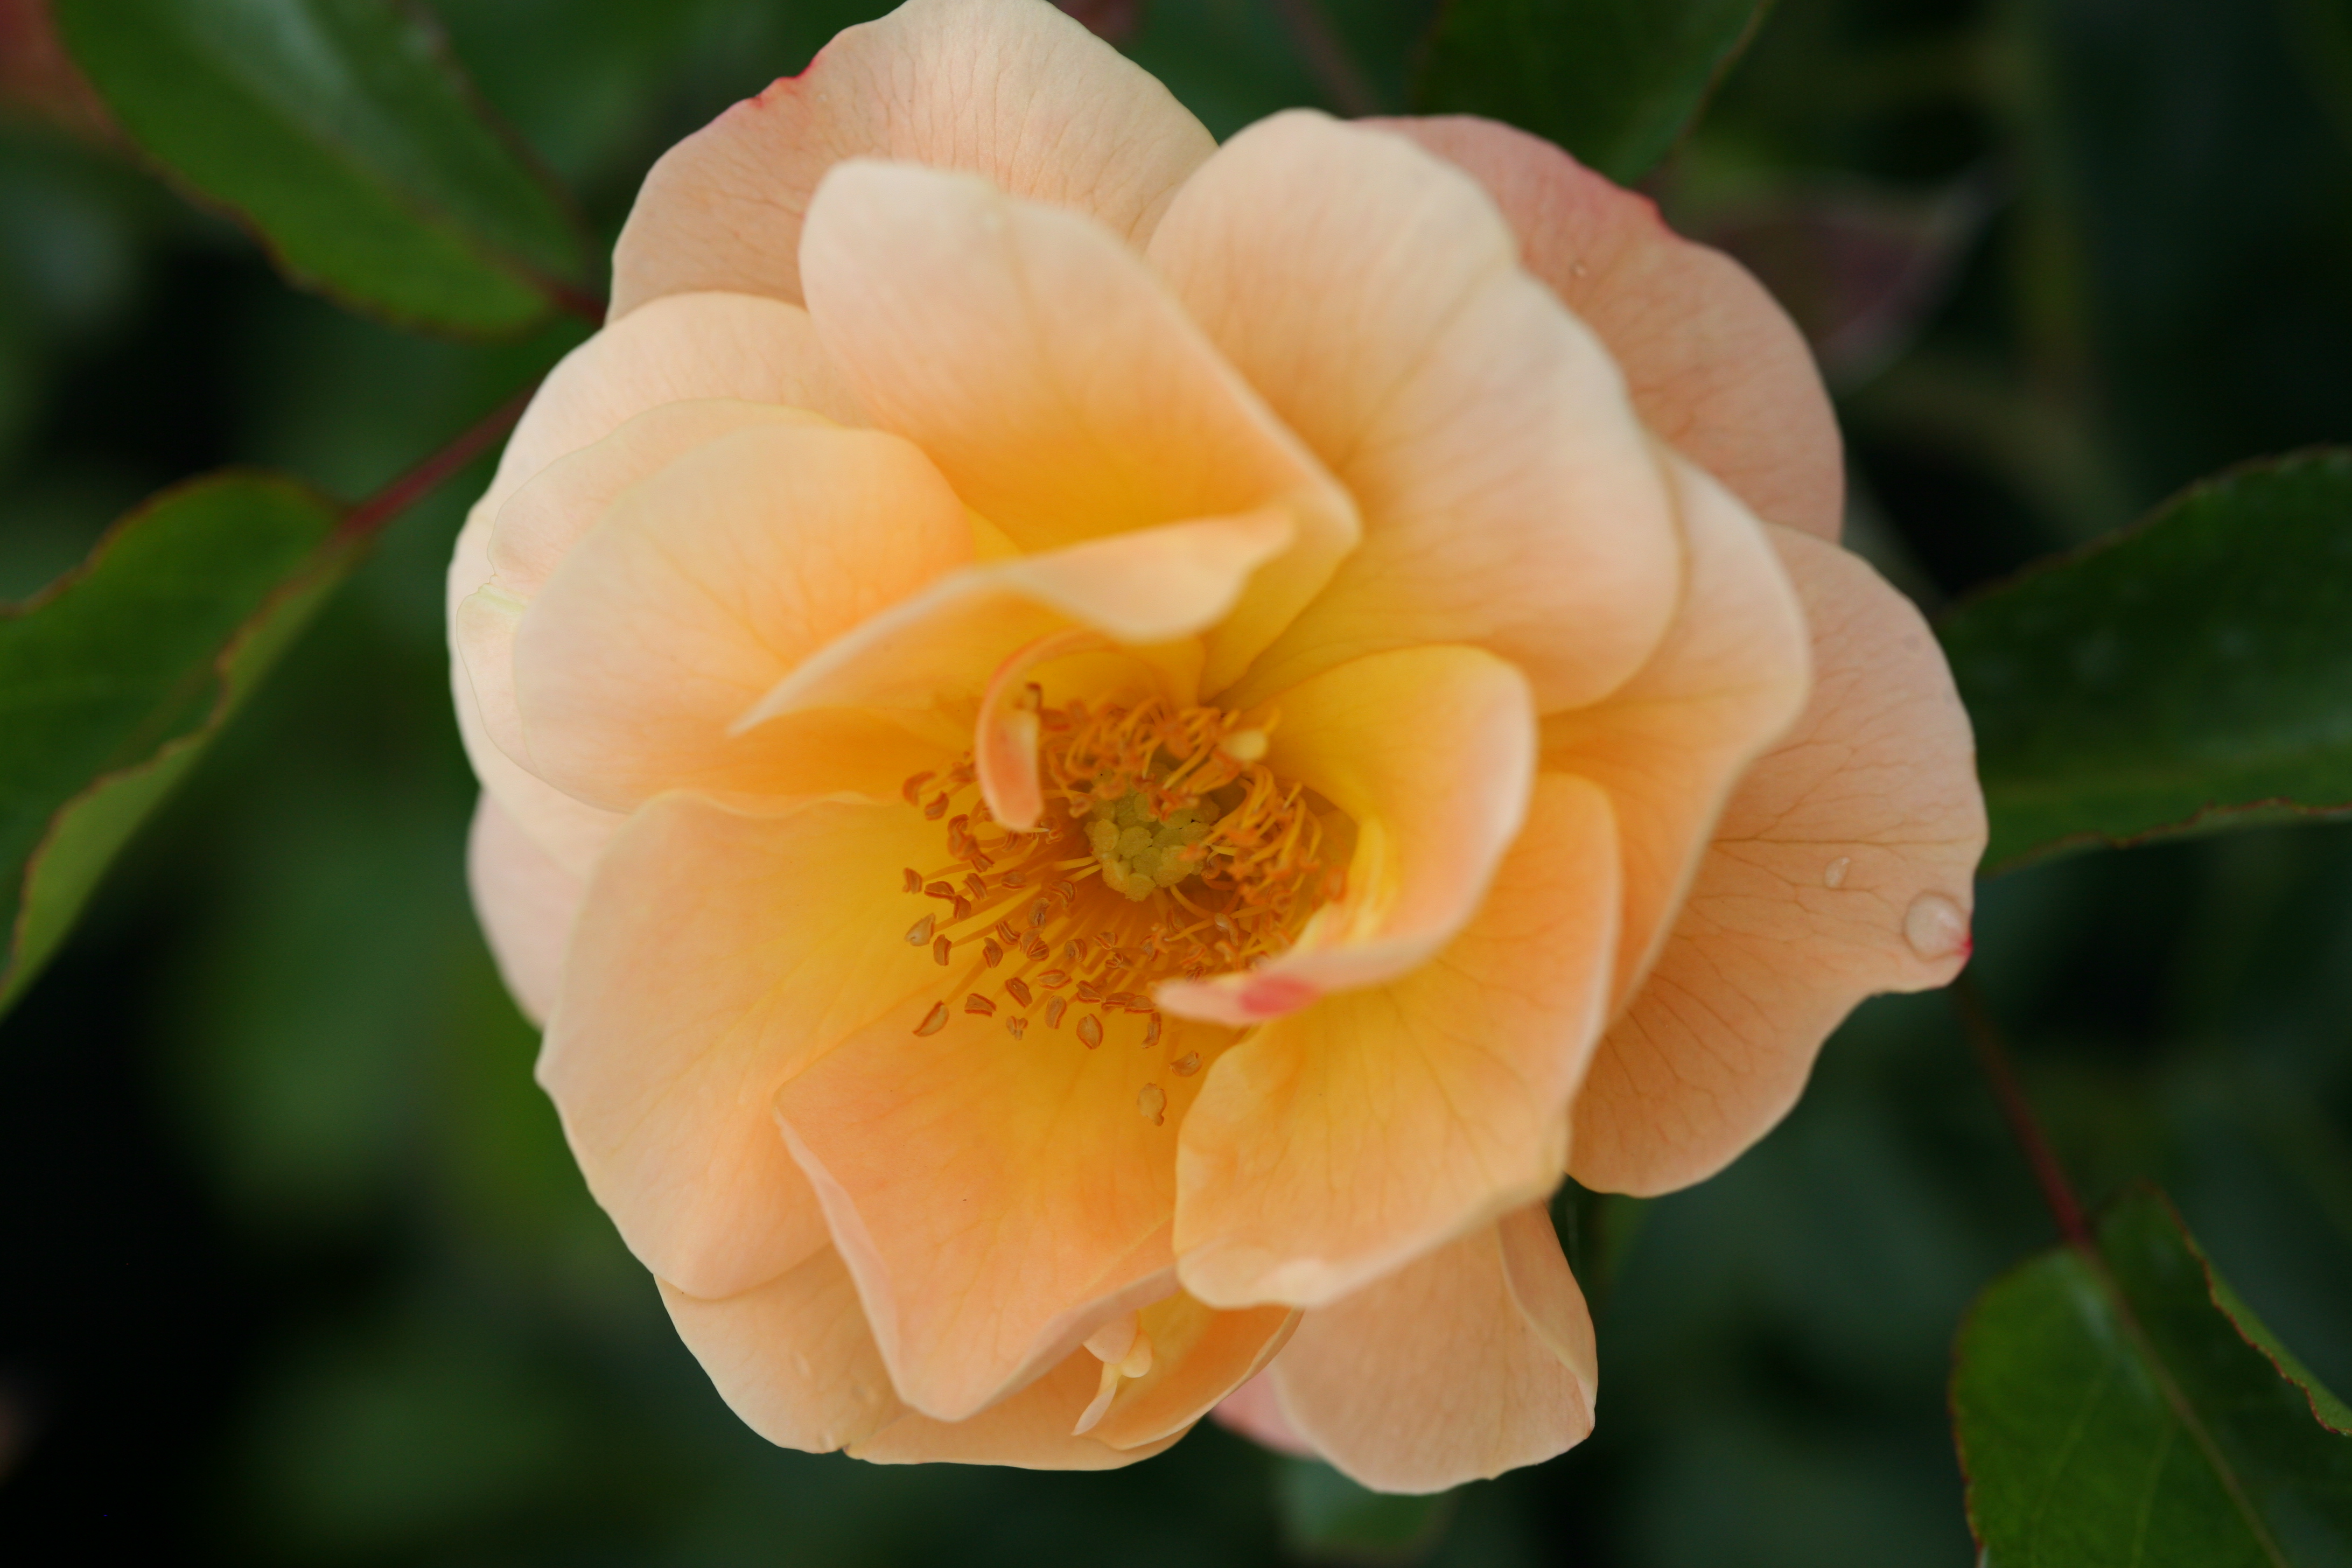 Whartons Garden Roses Wholesale Roses Products Flower Carpet Amber